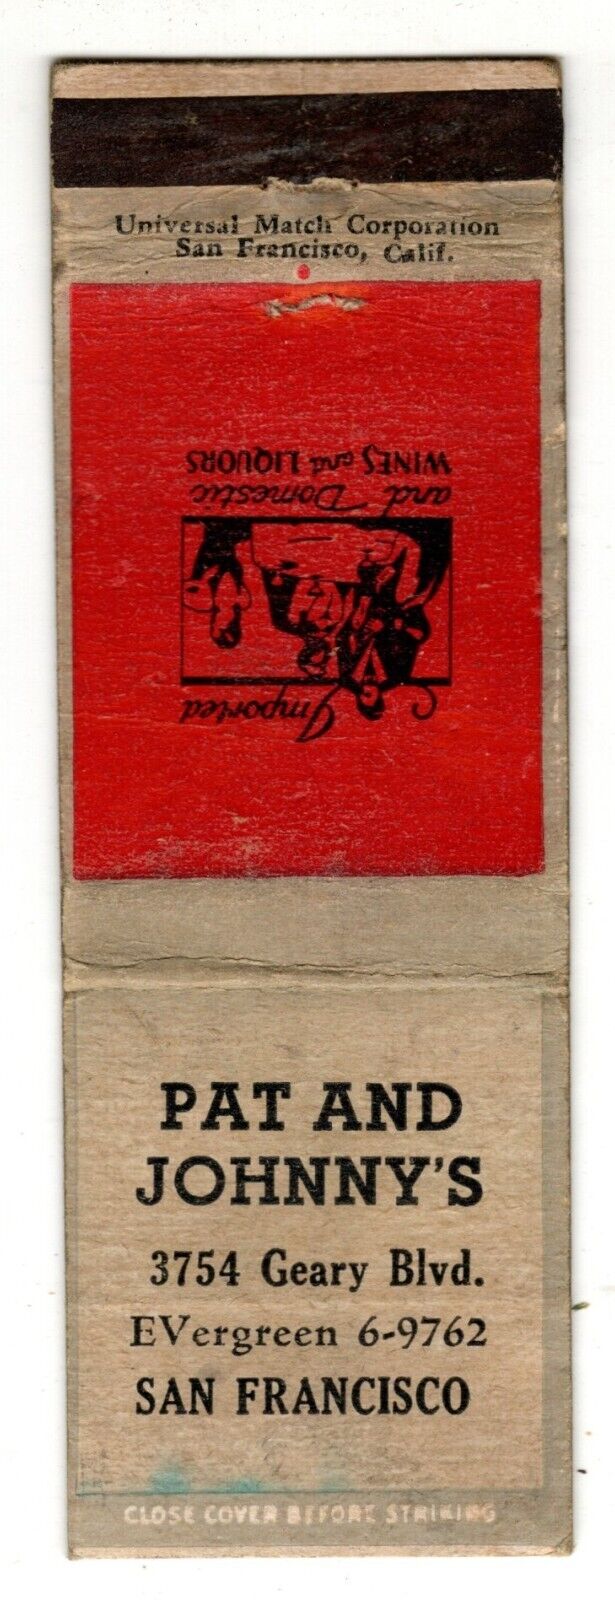 PAT AND JOHNNY\'S matchbook matchcover - SAN FRANCISCO, CALIFORNIA